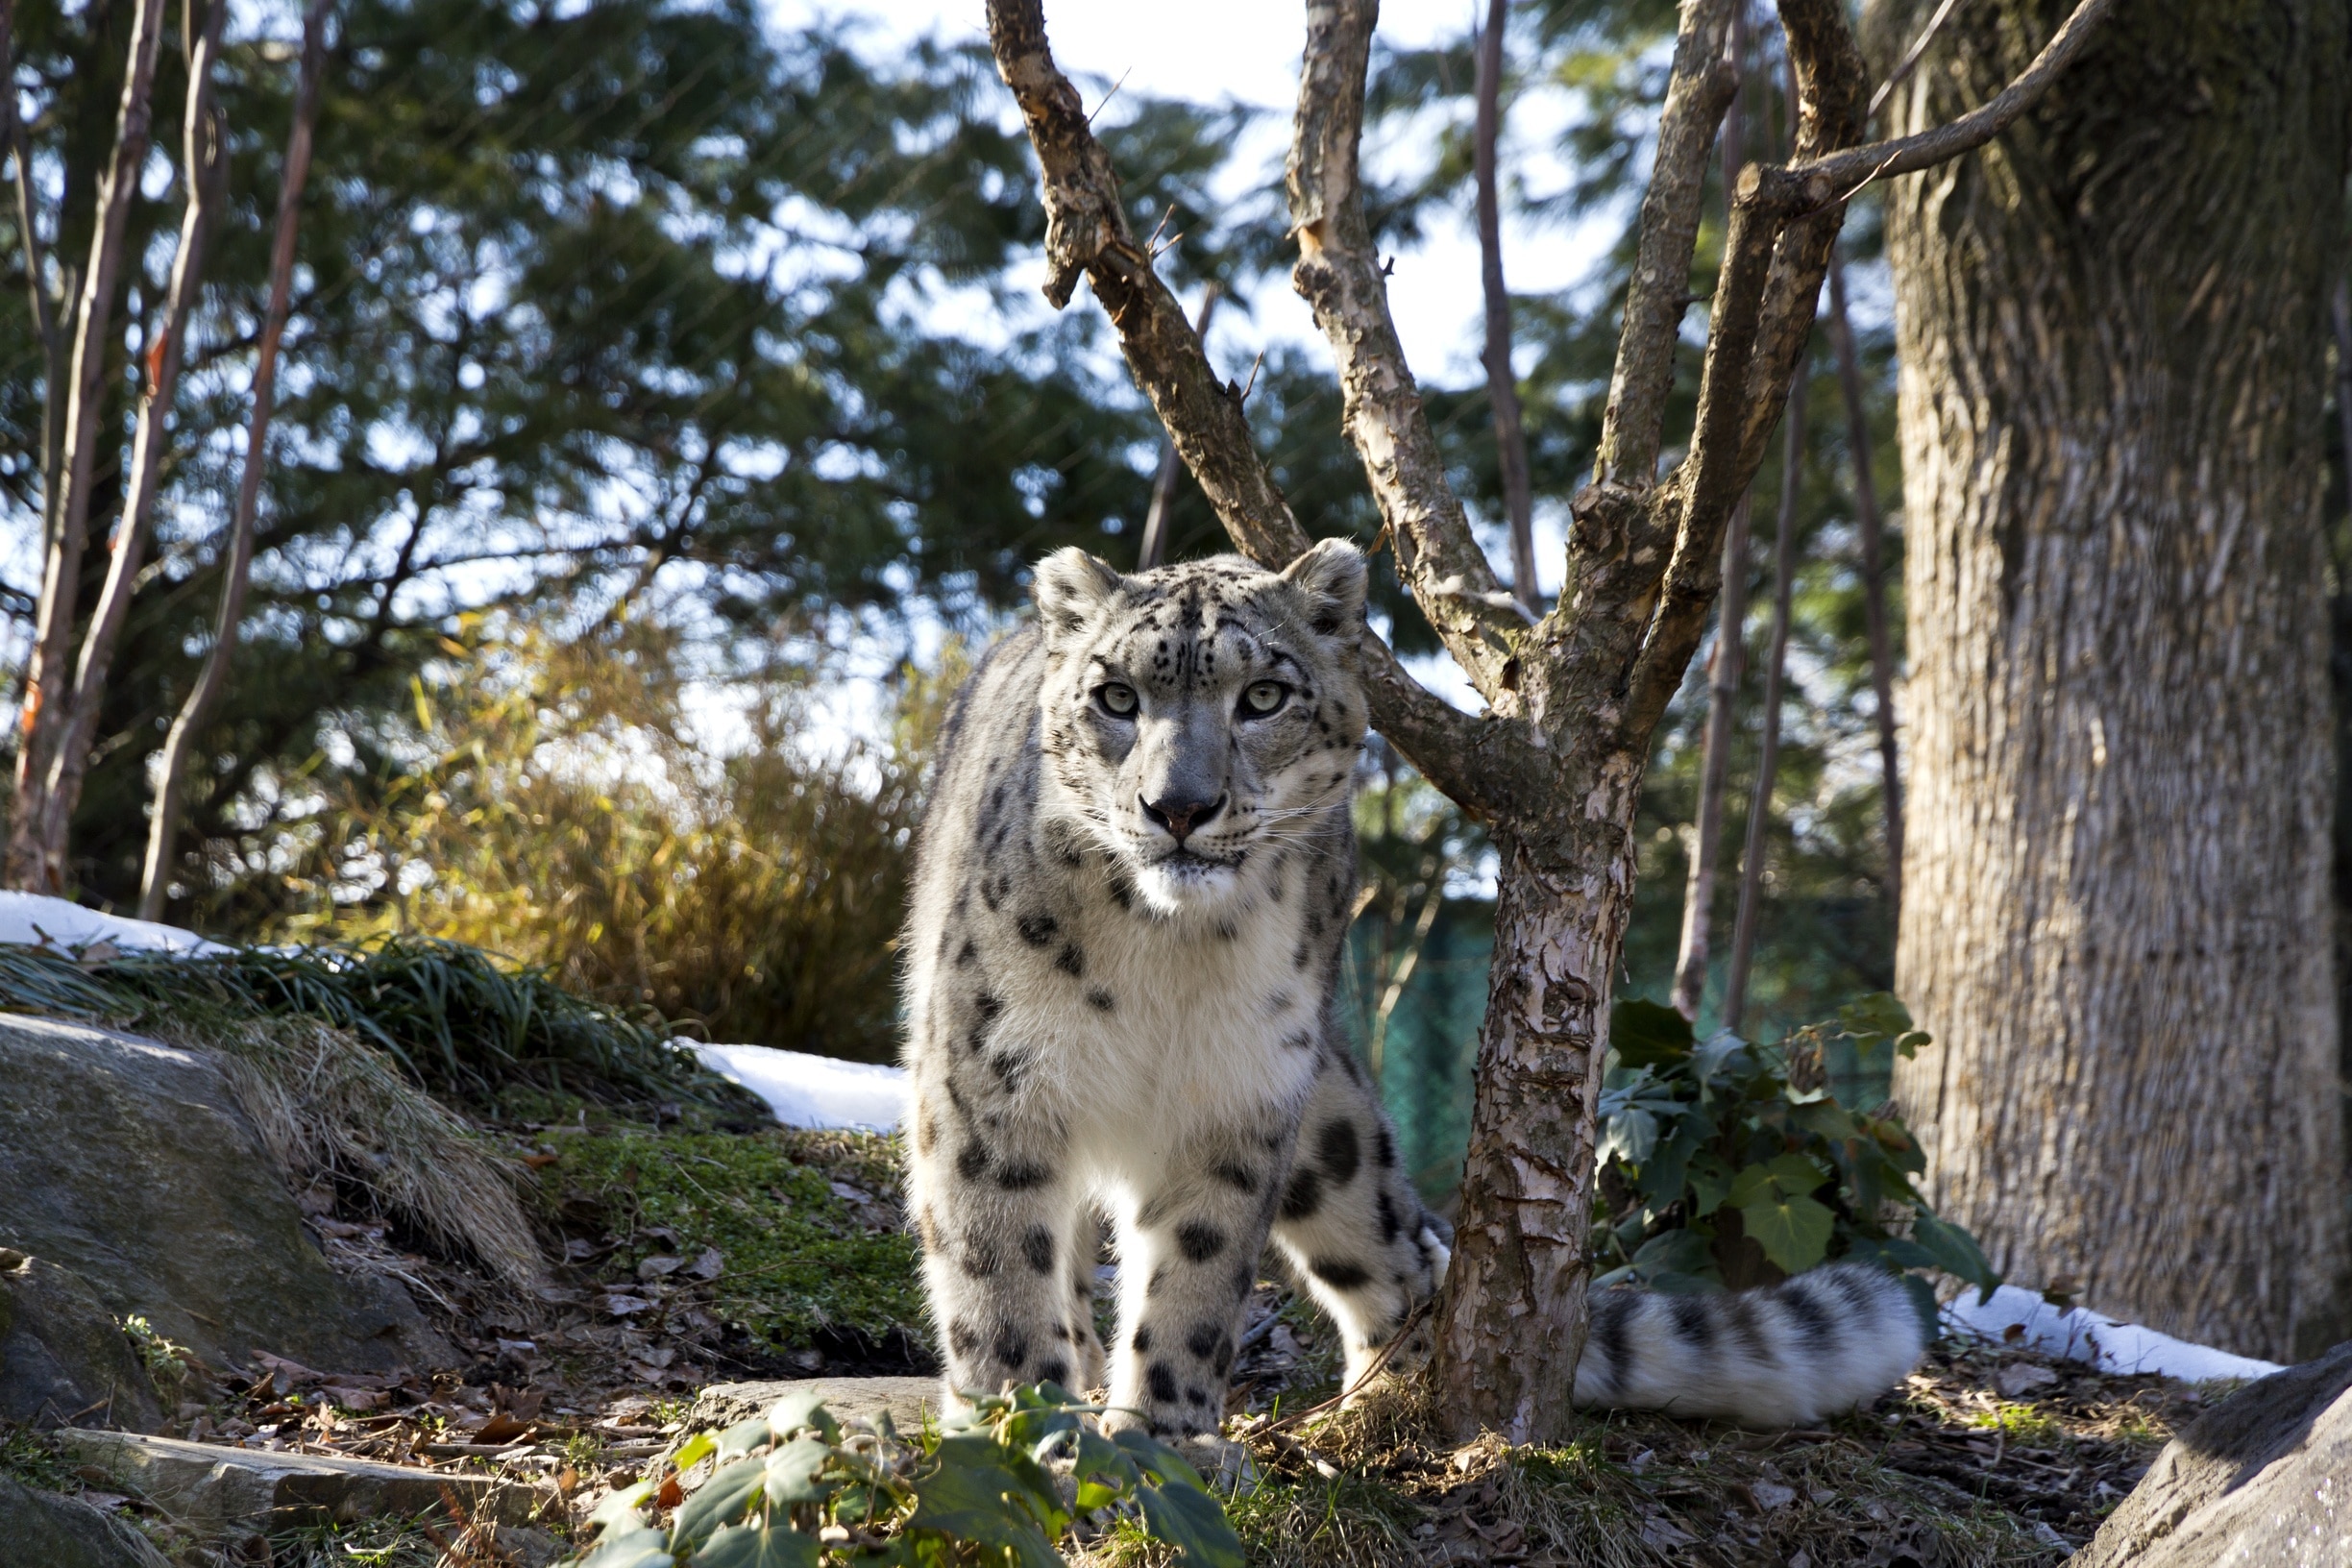 The Snow Leopard is my favourite of the big cats. I got lucky with this shot taken in Central Park Zoo.